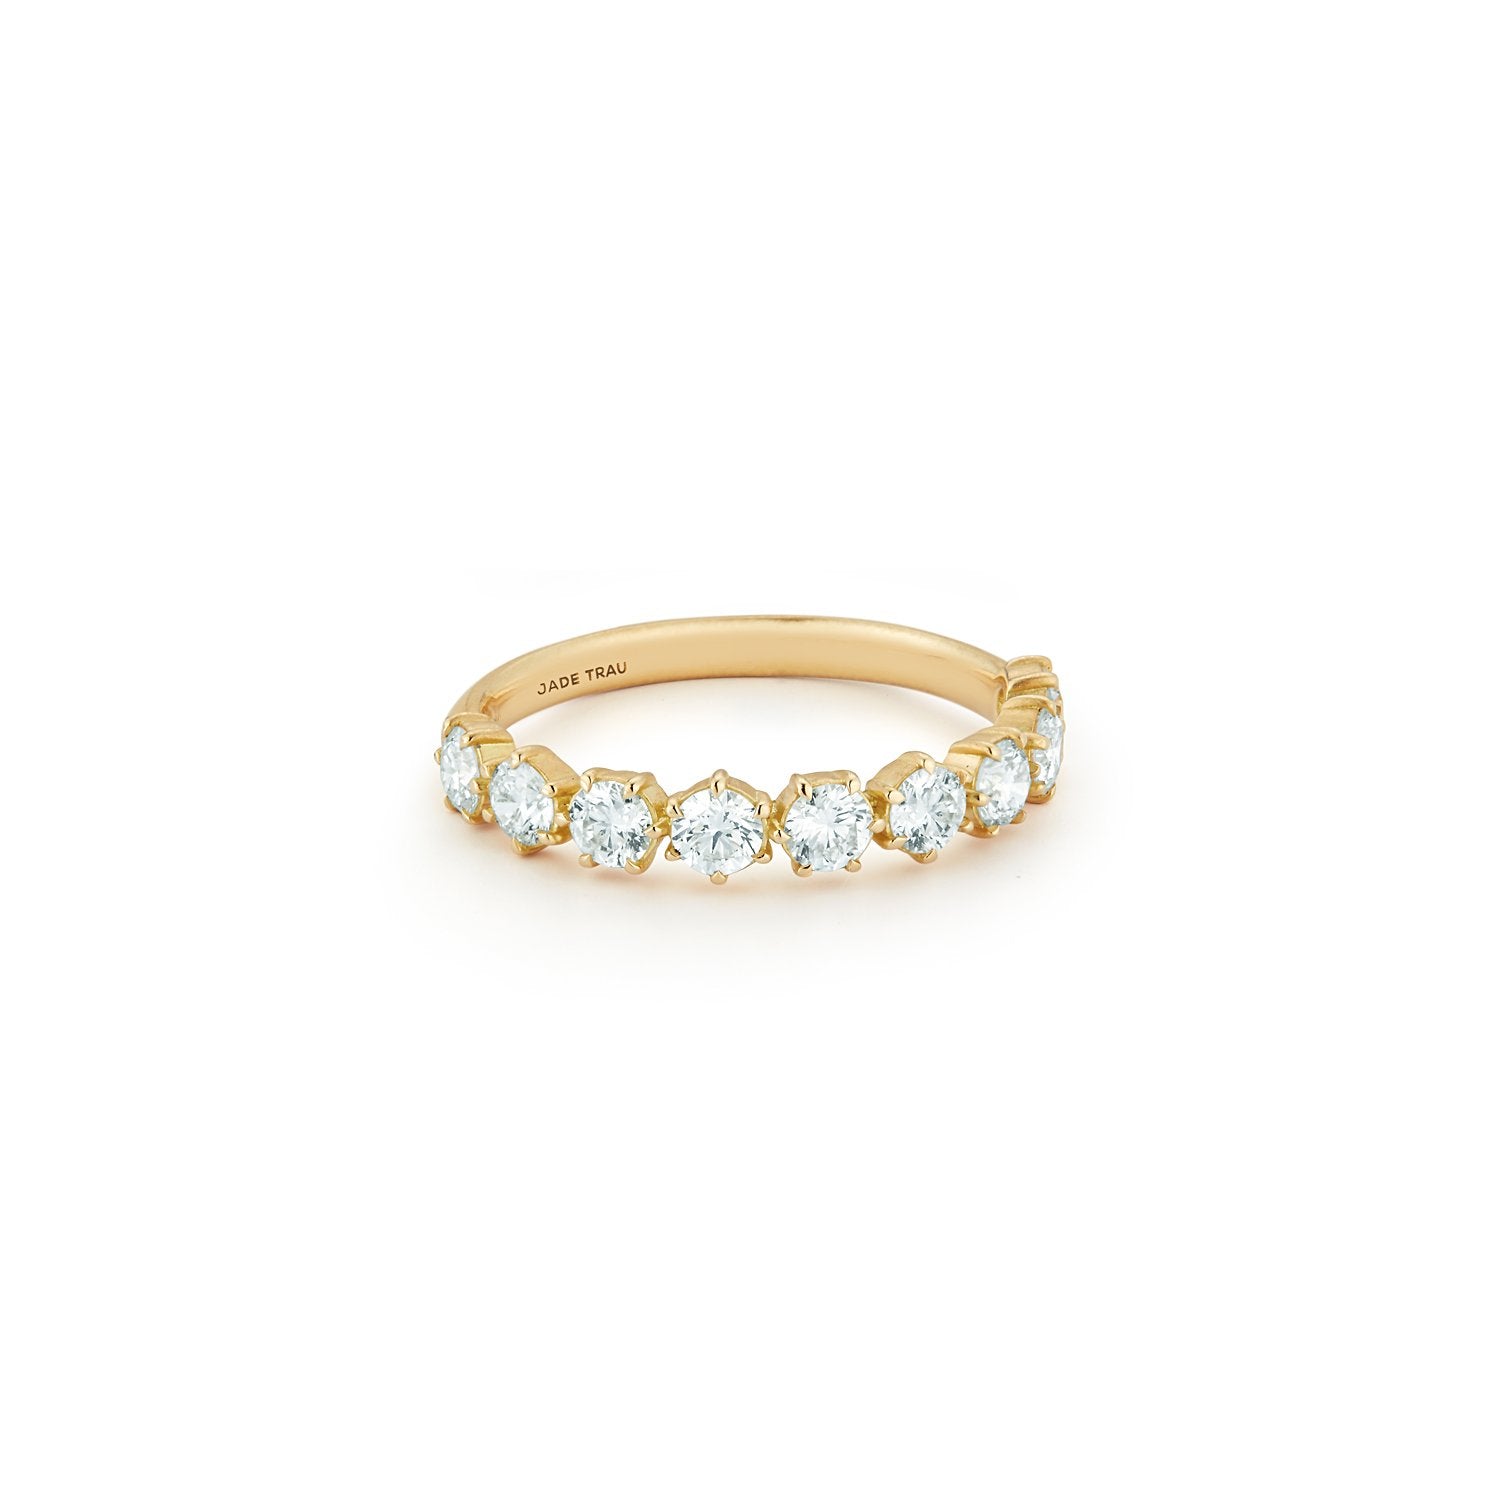 Catherine 1/2 Way Eternity No. 2 in 18K Yellow Gold